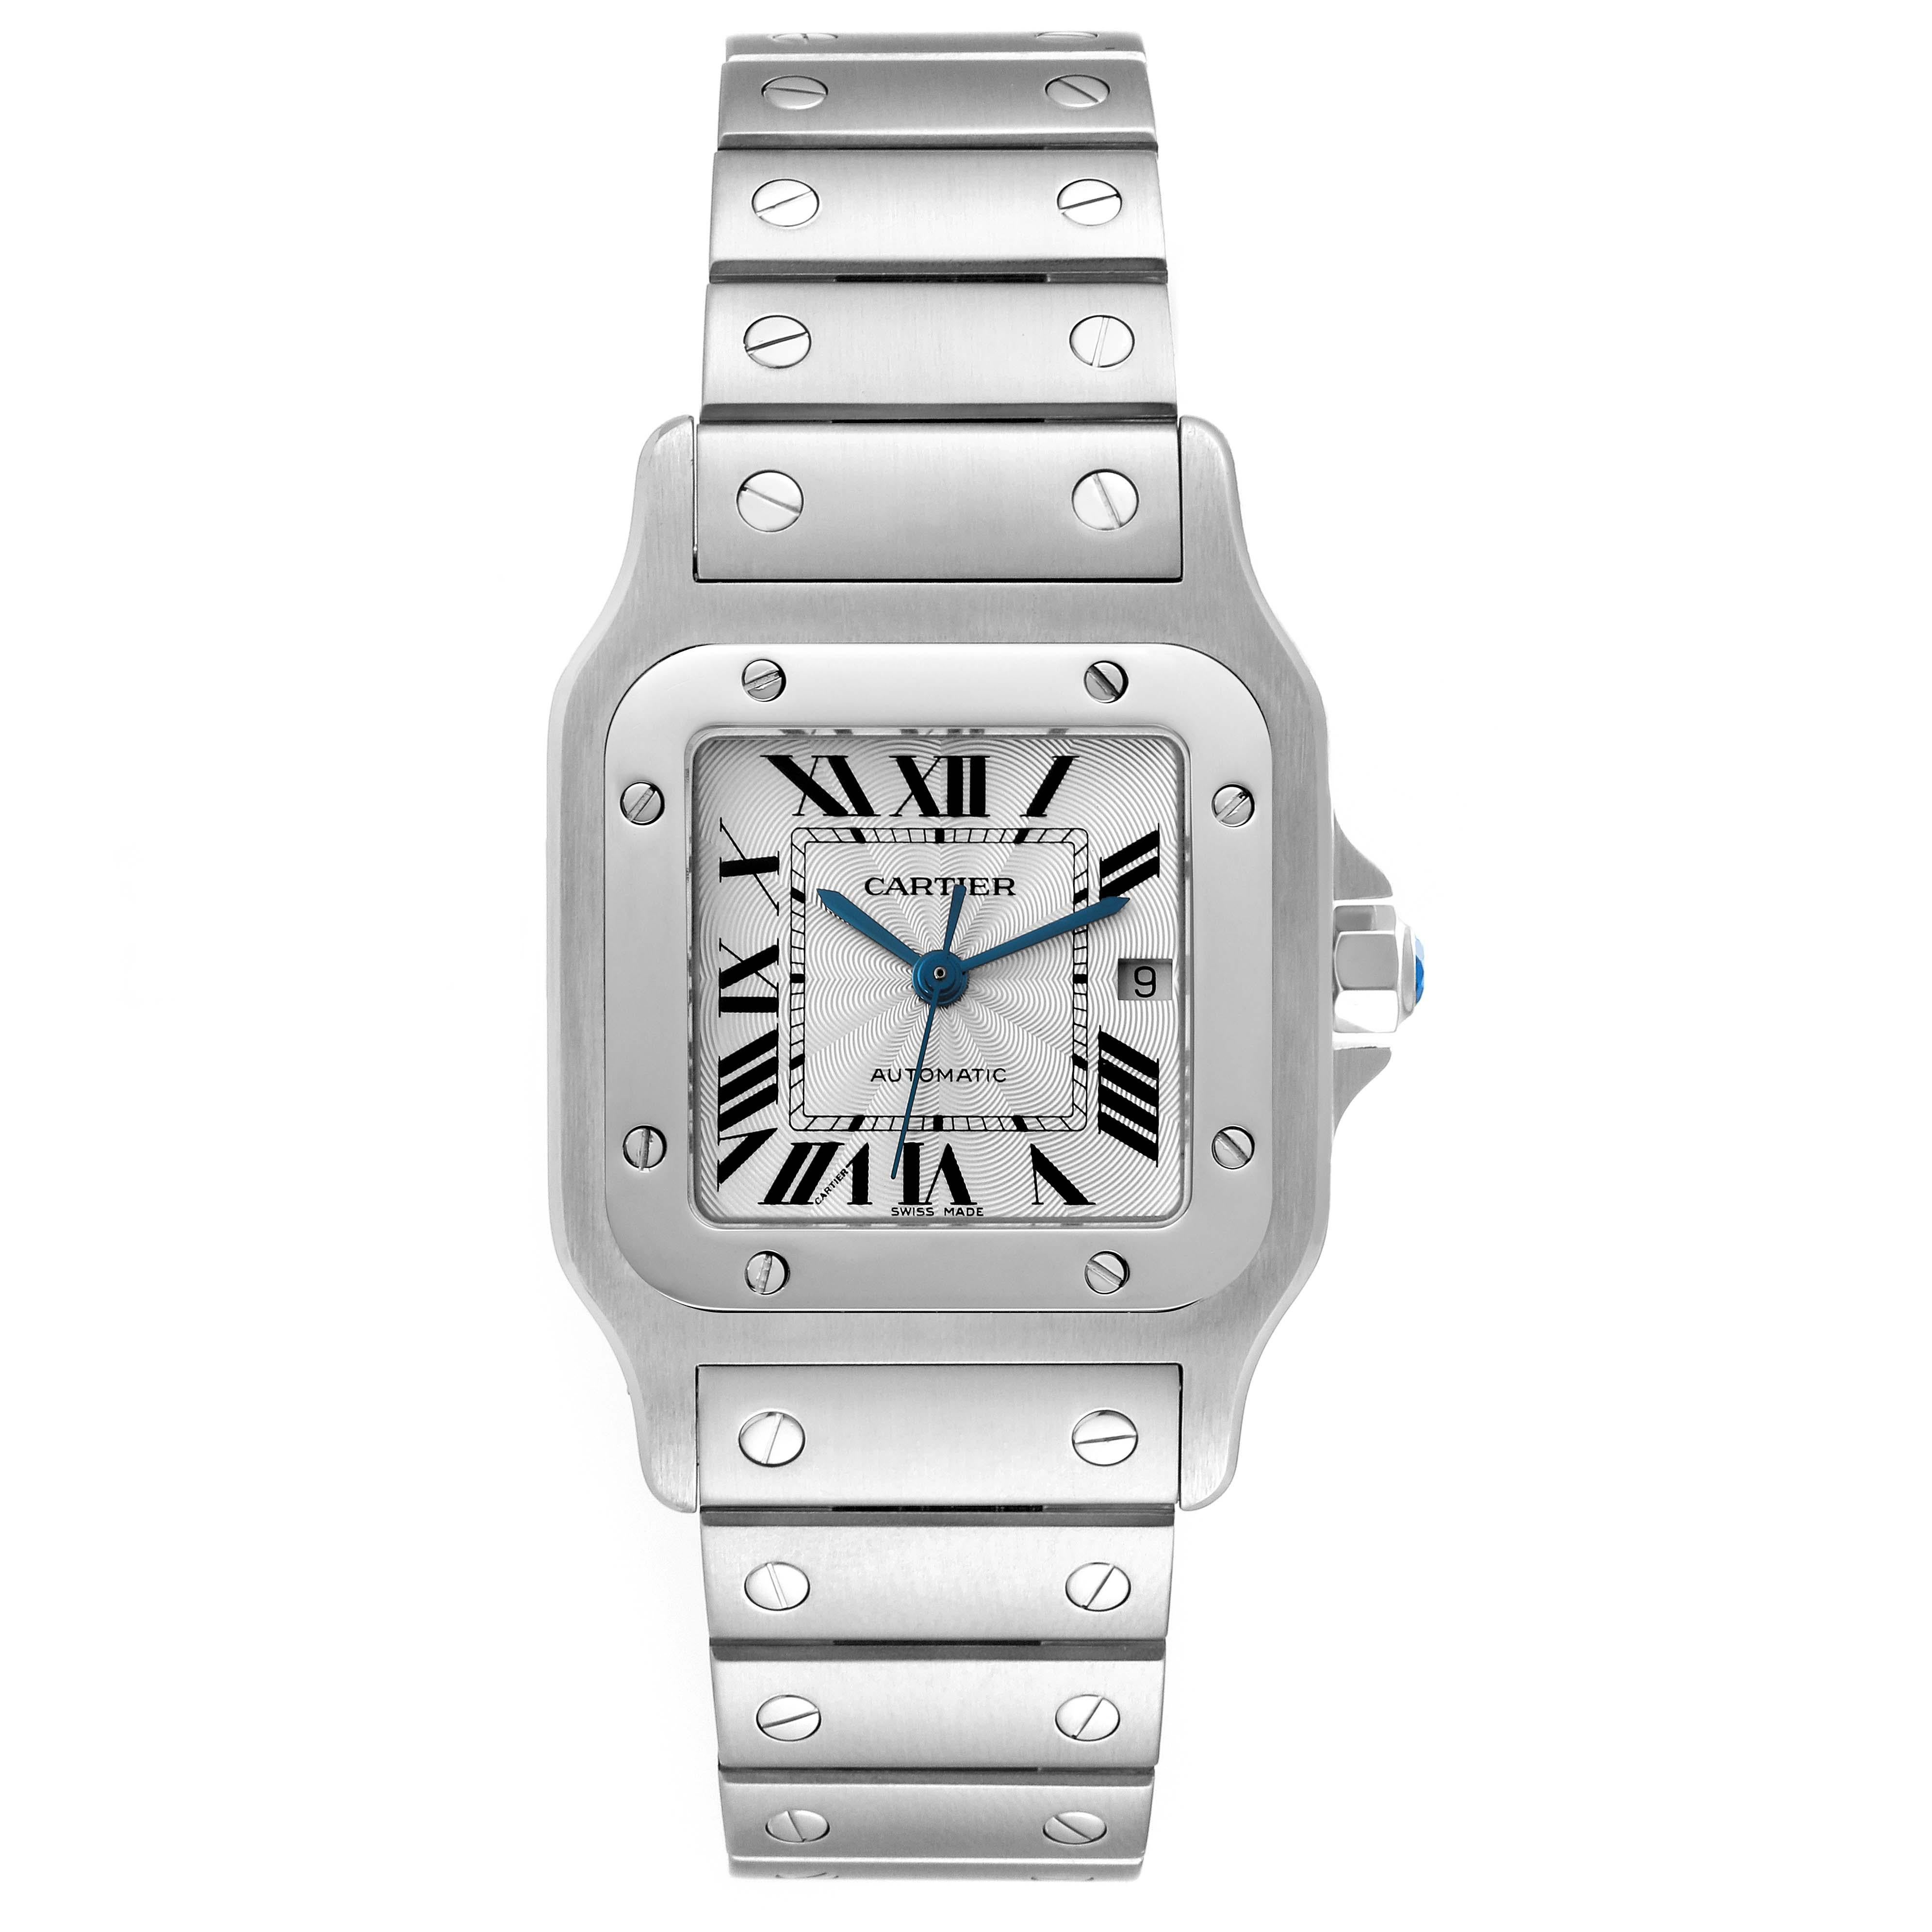 Cartier Santos Galbee Silver Dial Automatic Steel Mens Watch W20055D6 Box Papers. Automatic self-winding movement. Stainless steel case 29.0 x 29.0 mm. Steel octagonal crown set with the faceted blue spinel. Stainless steel bezel punctuated with 8